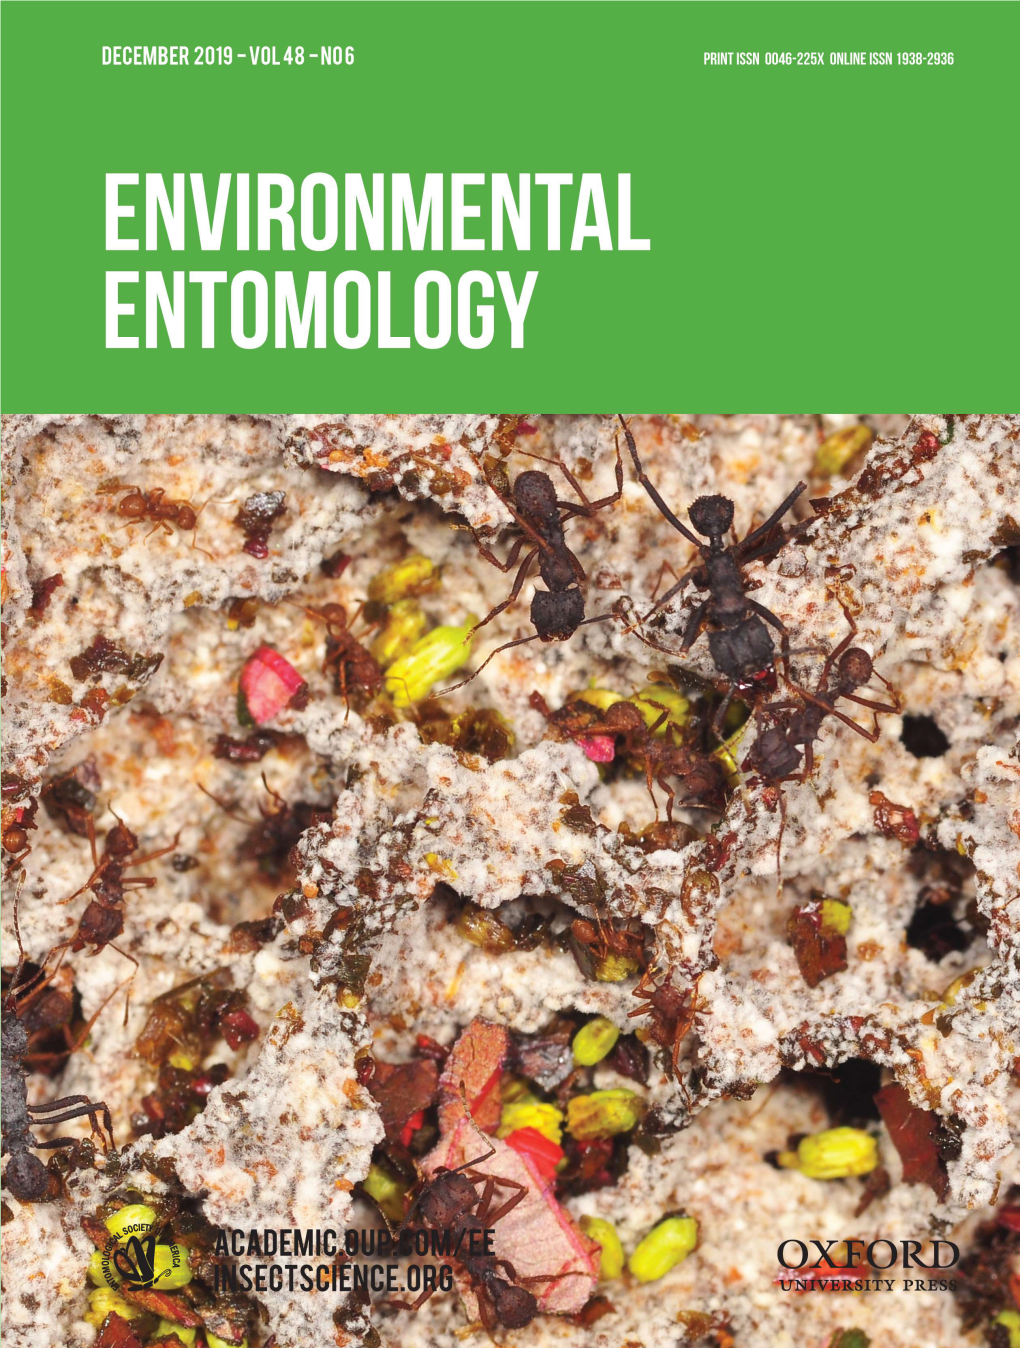 Foraging Ecology of the Leaf-Cutter Ant, Acromyrmex Subterraneus